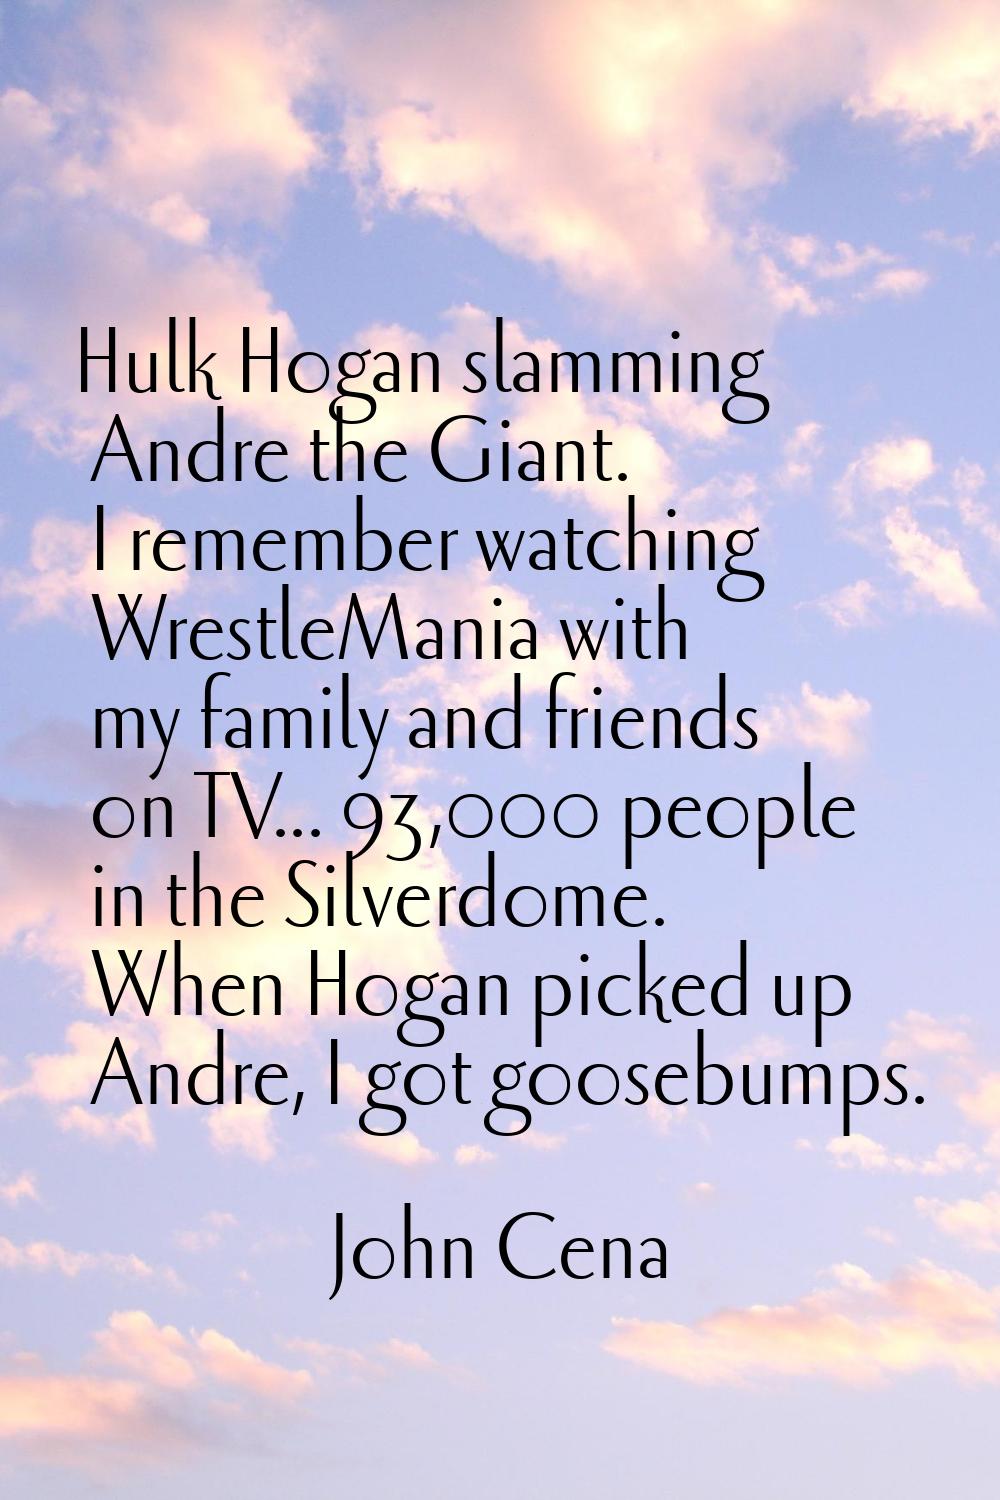 Hulk Hogan slamming Andre the Giant. I remember watching WrestleMania with my family and friends on